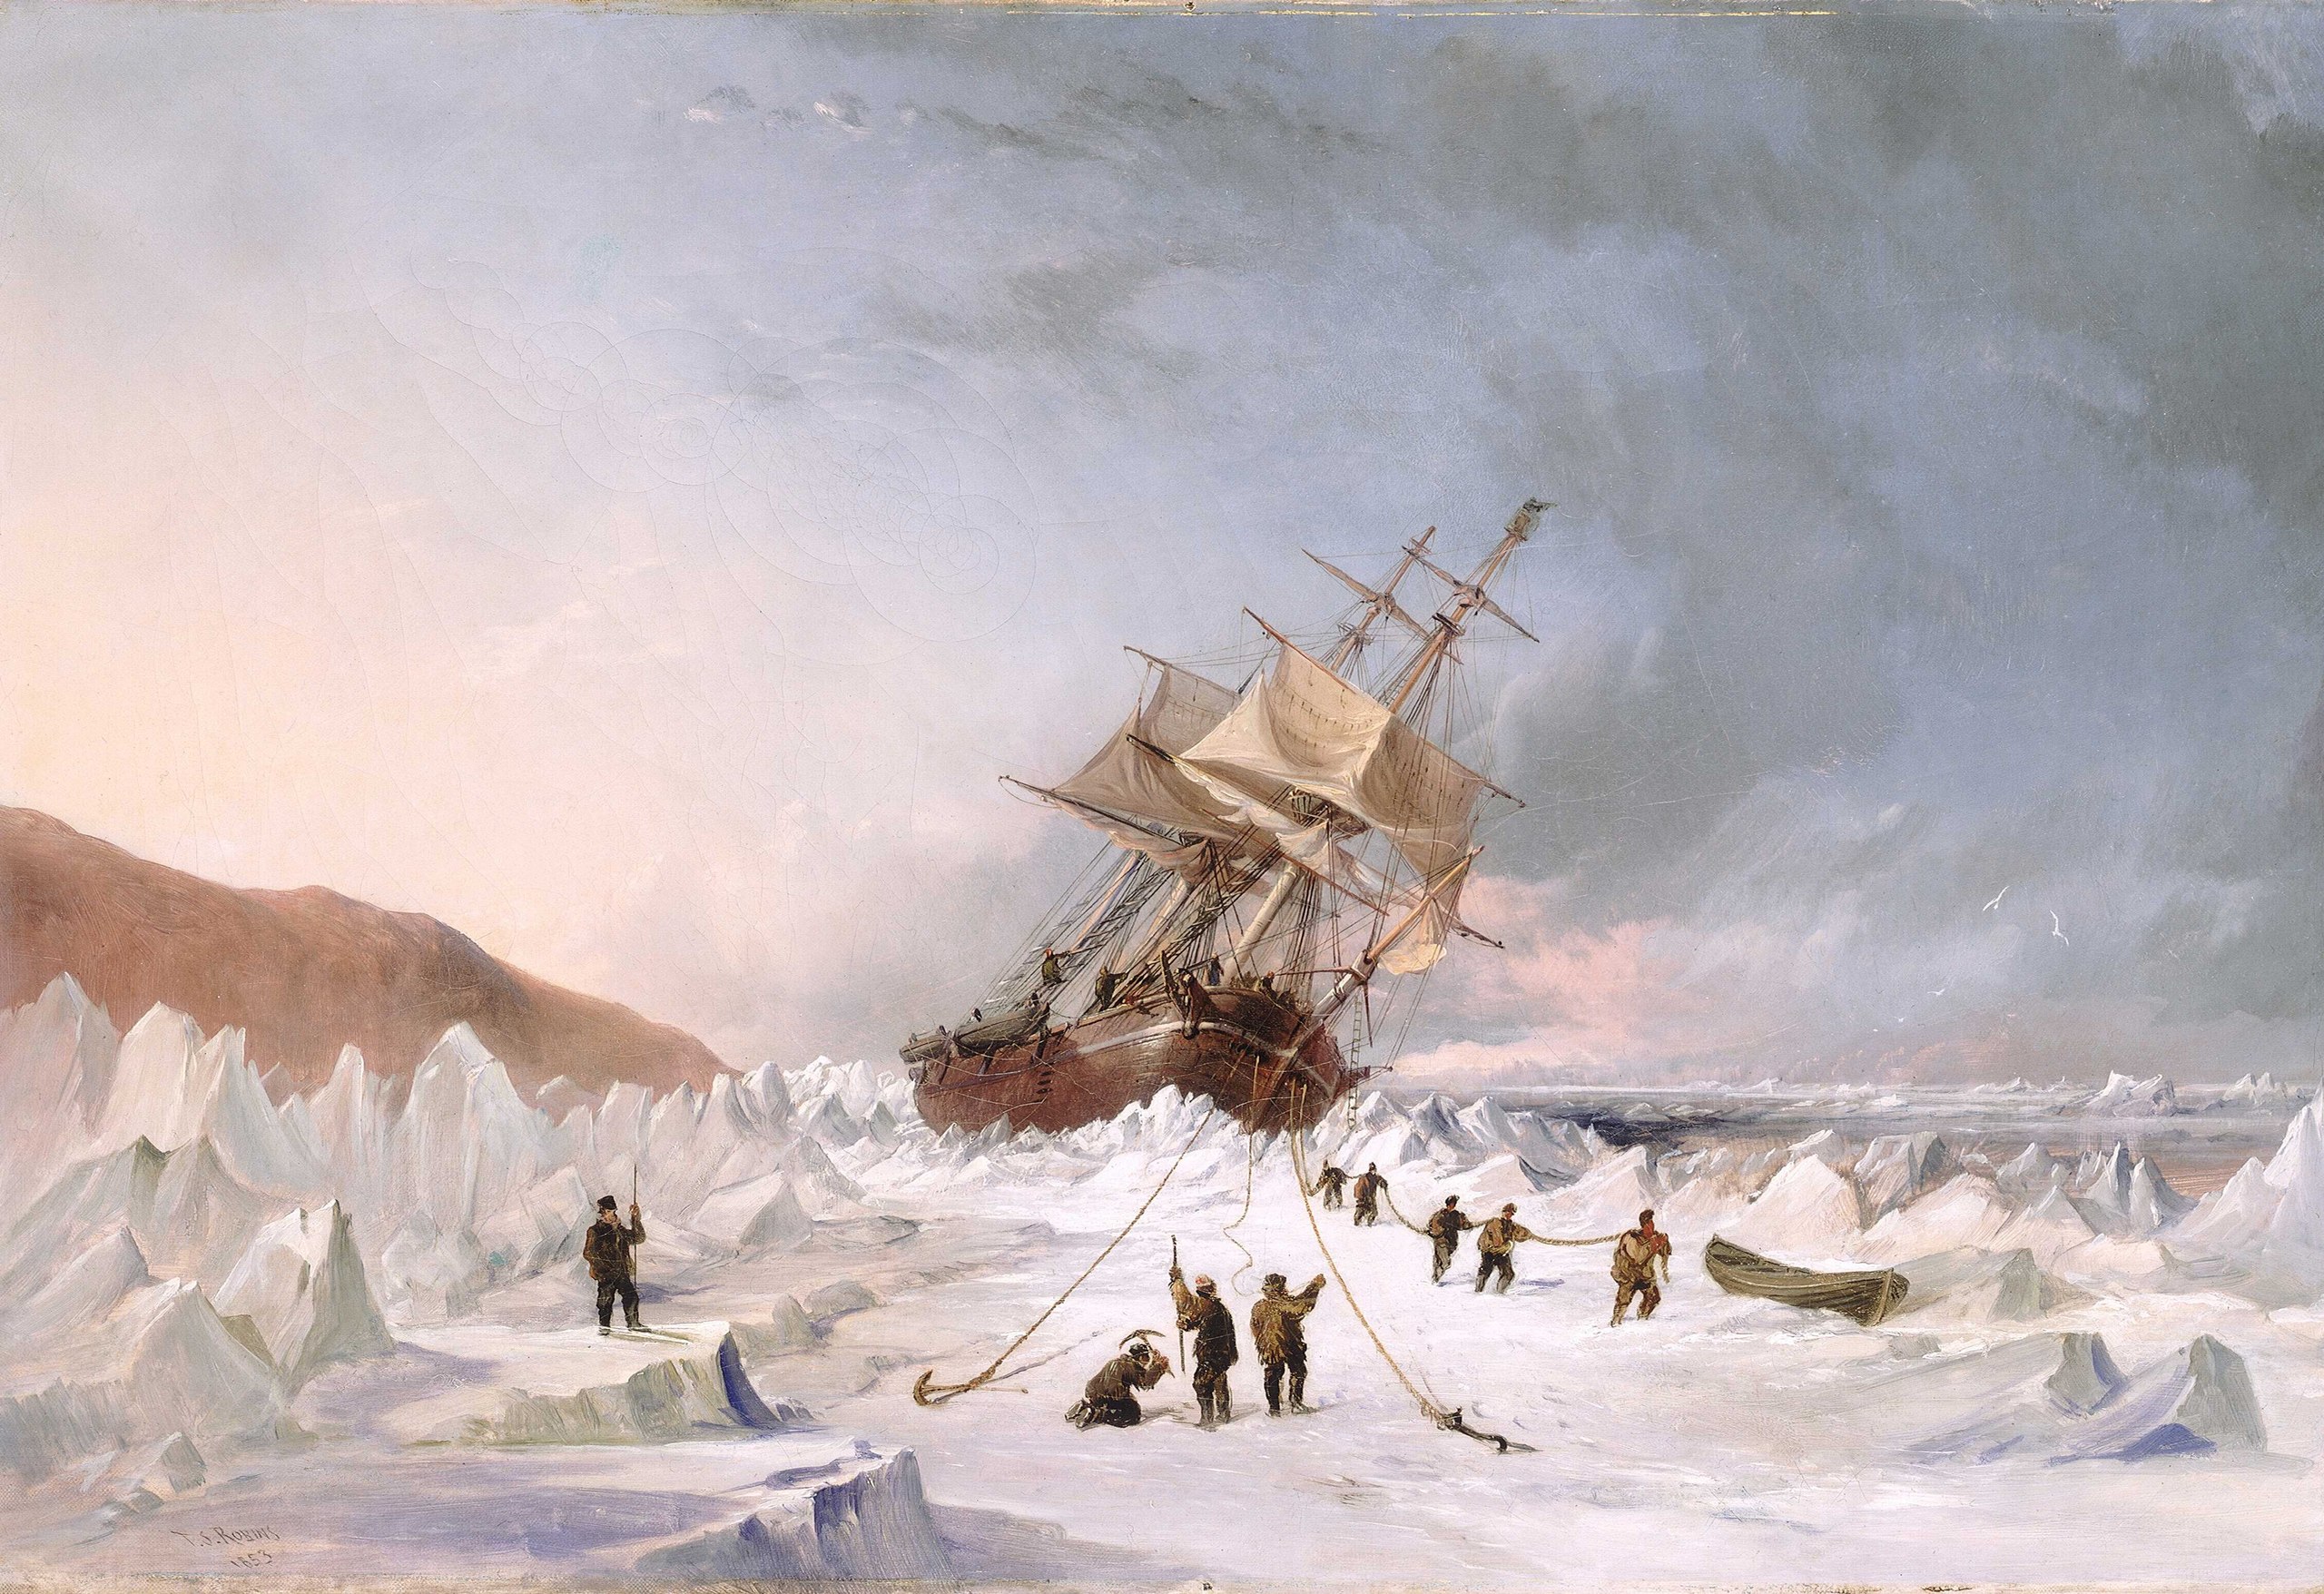 A leaning ship stuck in the tundra with rescuers hauling it free using ropes